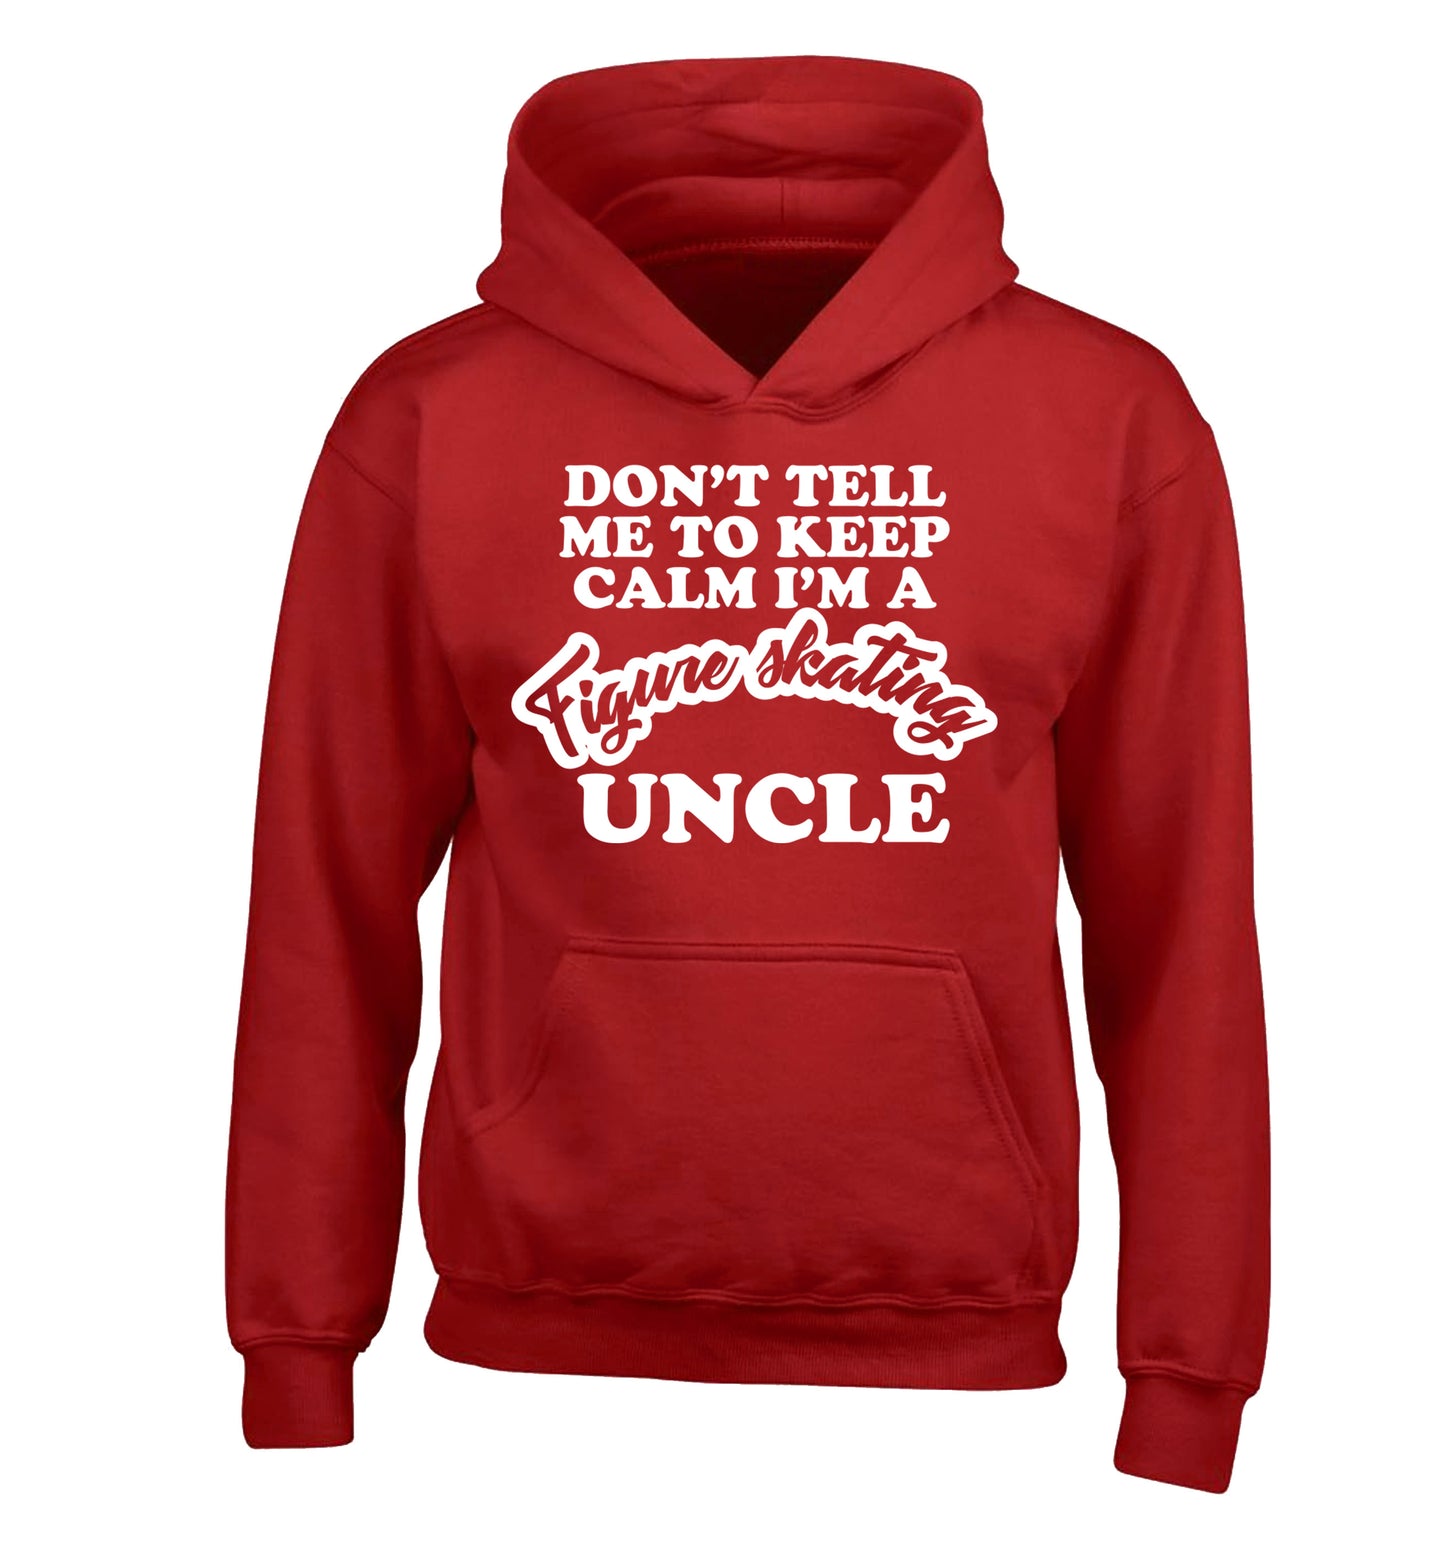 Don't tell me to keep calm I'm a figure skating uncle children's red hoodie 12-14 Years